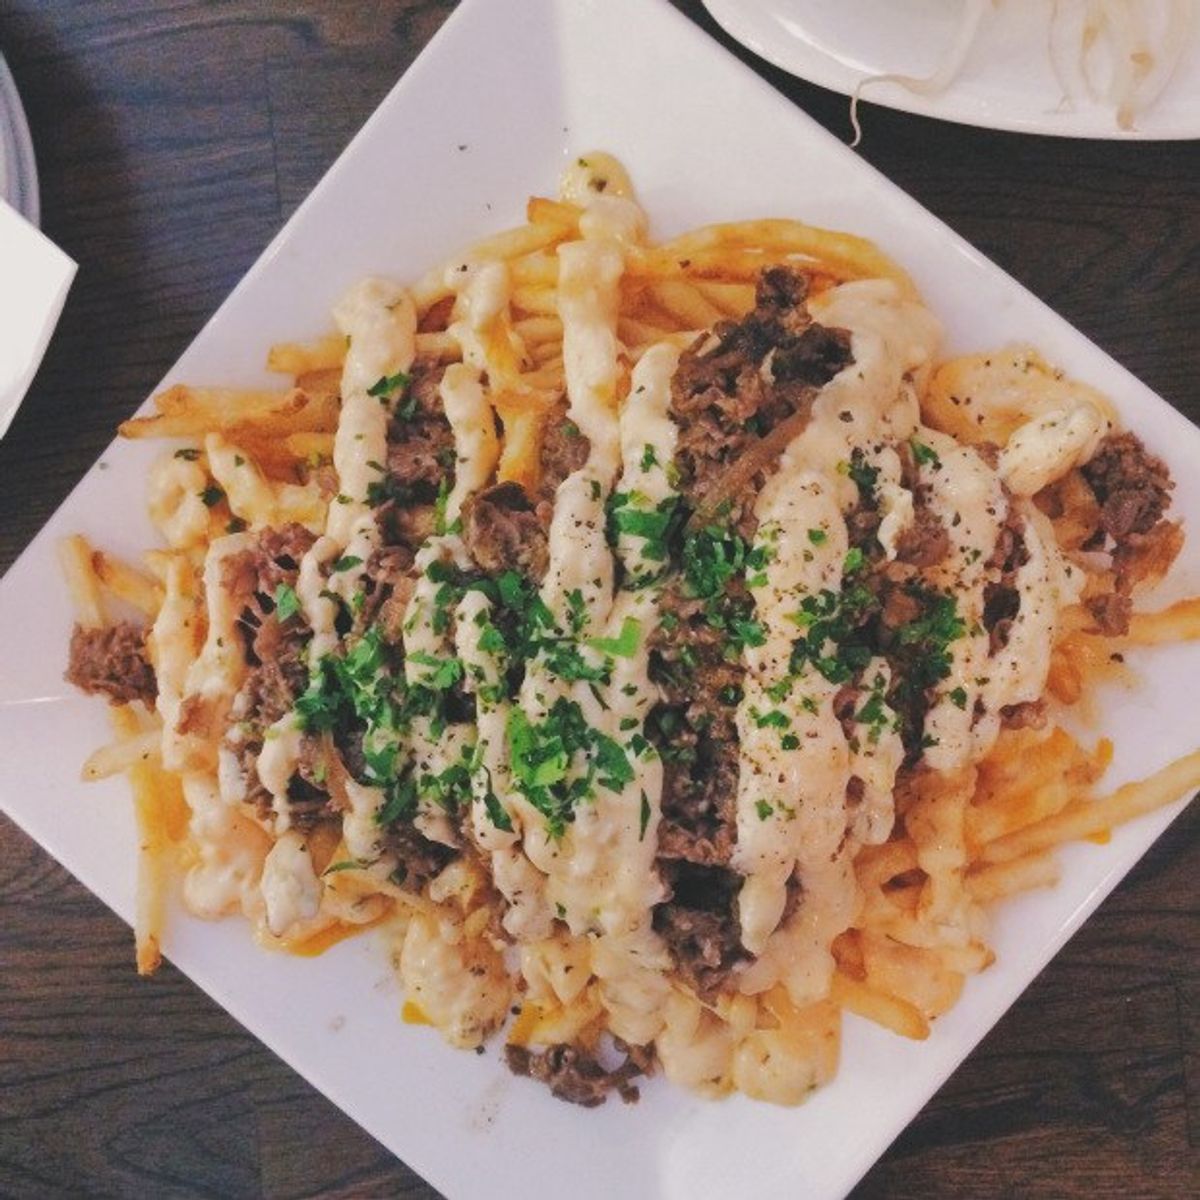 5 Great Places To Grab Grub In LA